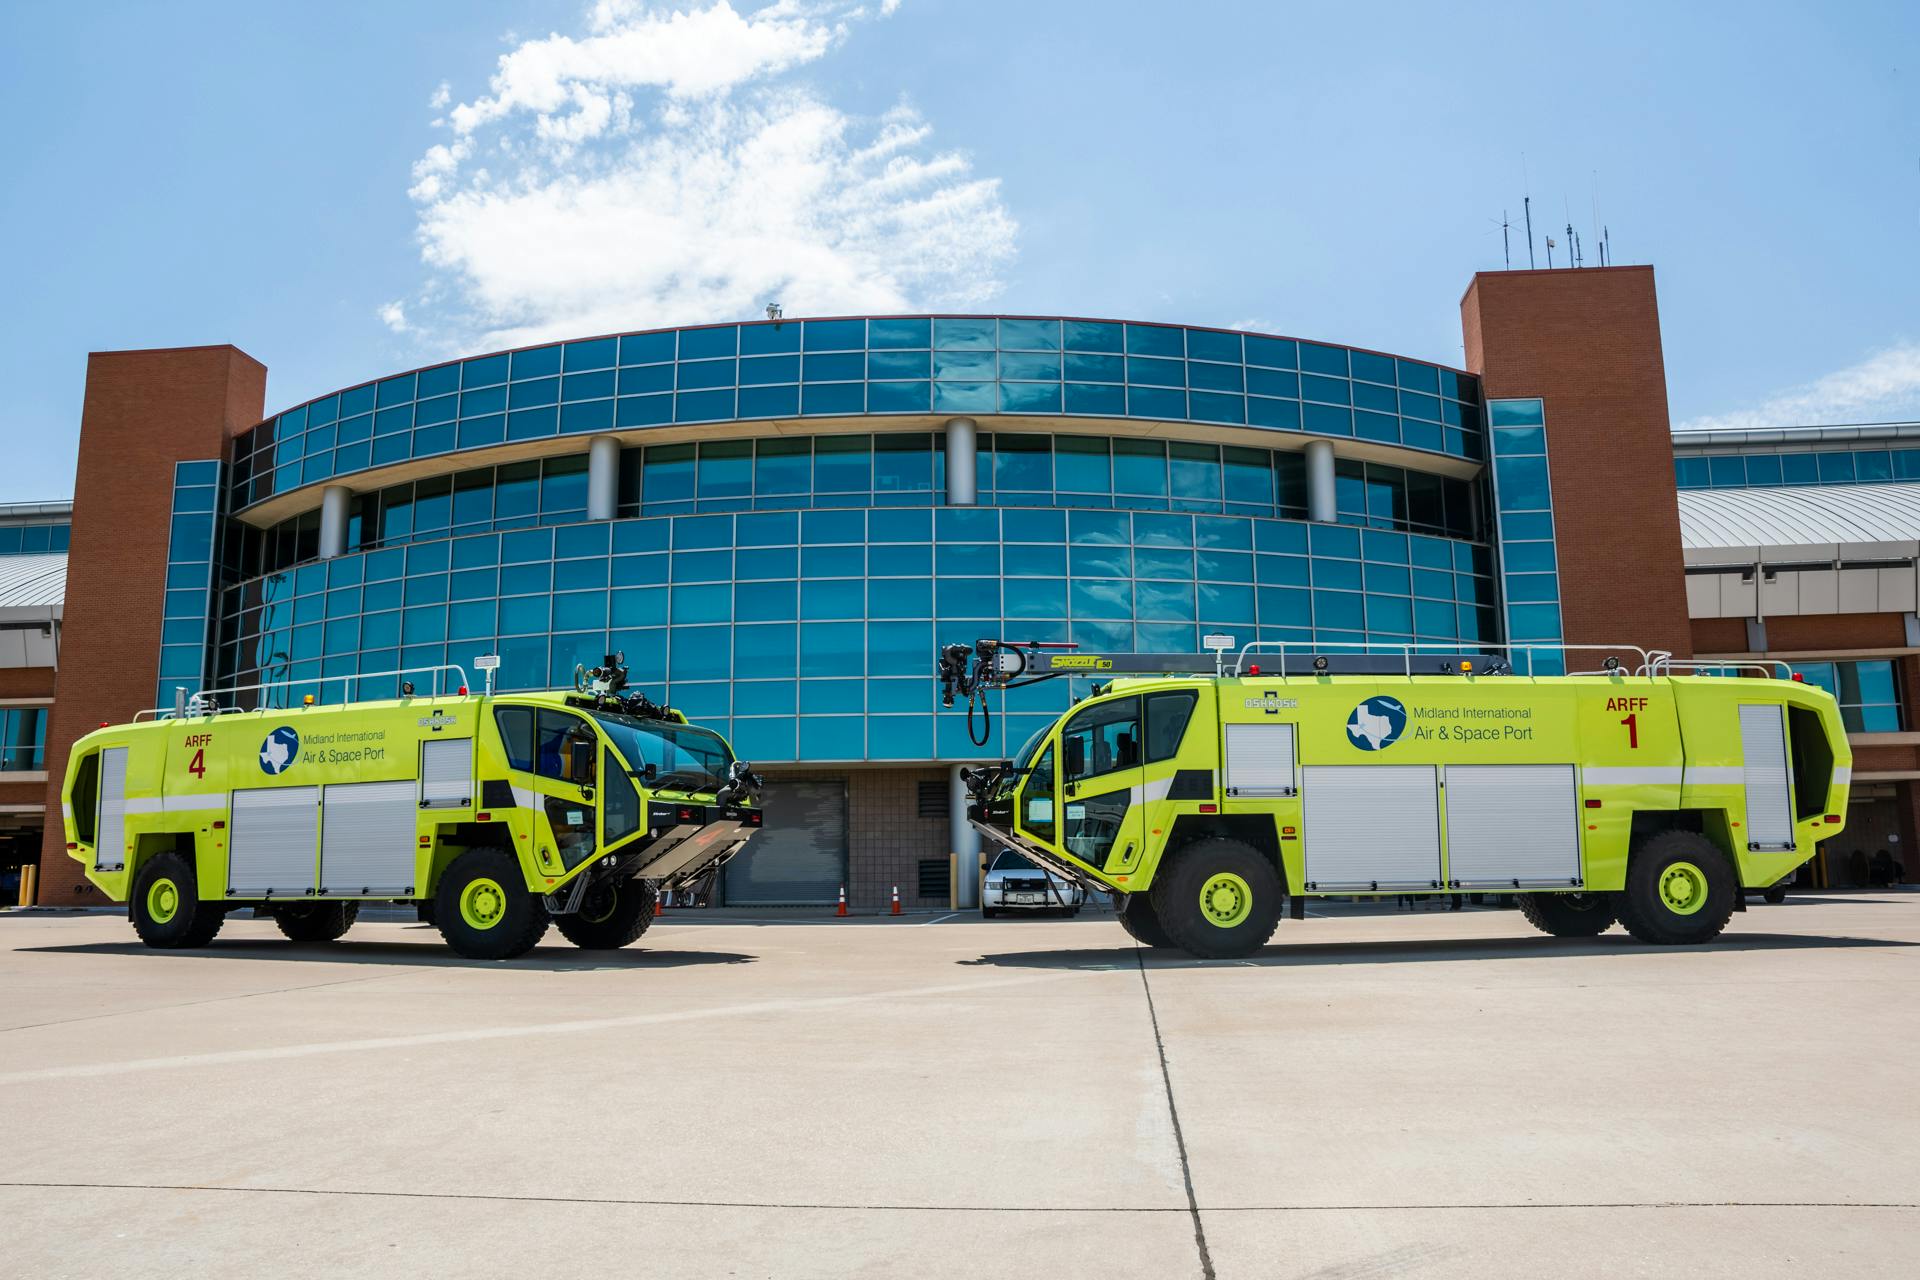 Midland International Air and Space Port Receives New FAA Class 4 Aircraft Rescue and Fire Fighting Vehicles cover image